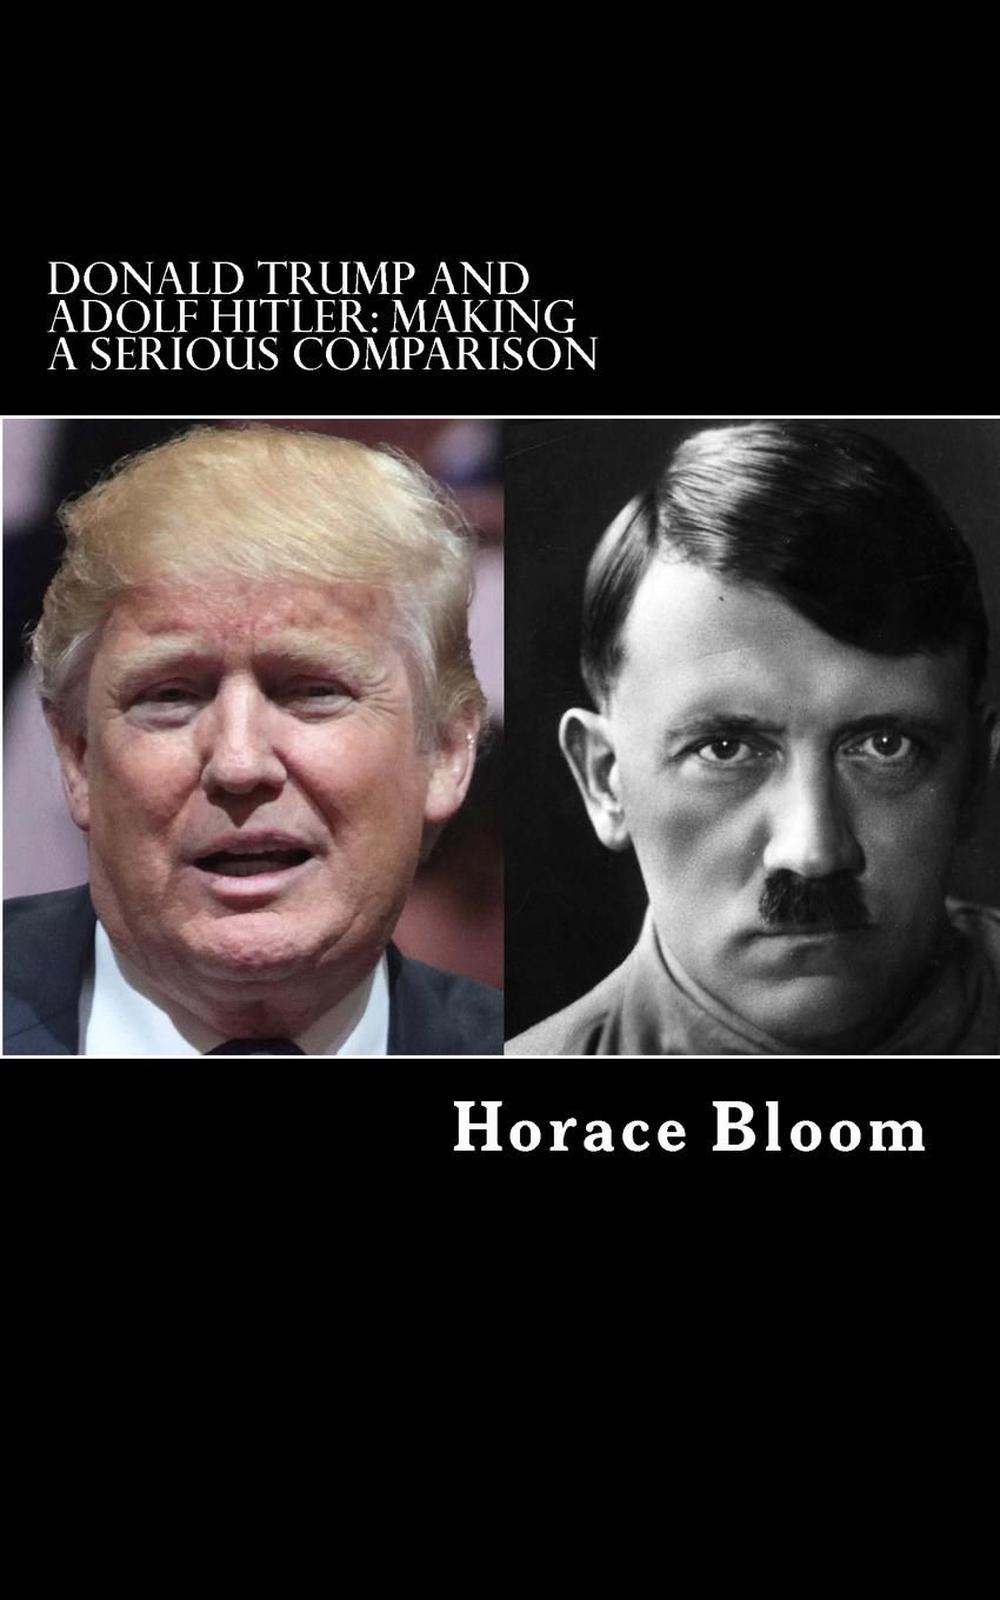 Comparing to hitler